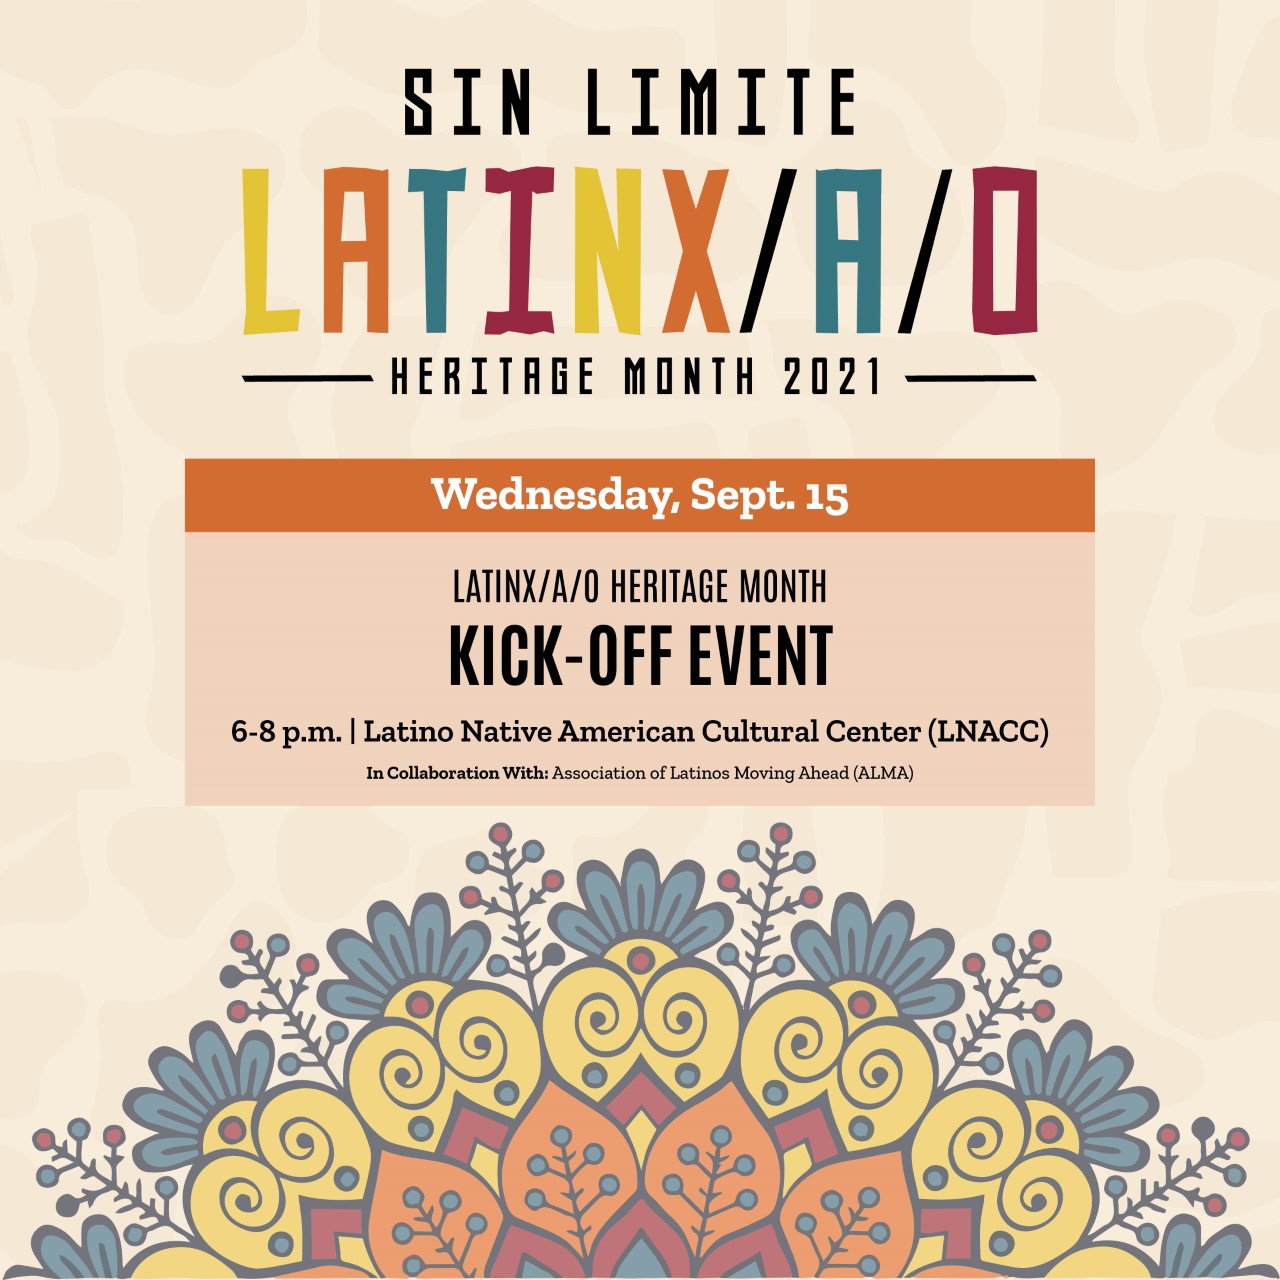 Graphic of Kickoff Event for Latinx/a/o Heritage Month. Top text reads “Sin Limite: Latinx/a/o Heritage Month 2021.” Middle text reads: Latinx/a/o Heritage Month Kick-off Event, 6-8pm, Latino Native American Cultural Center (LNACC), in collaboration with: